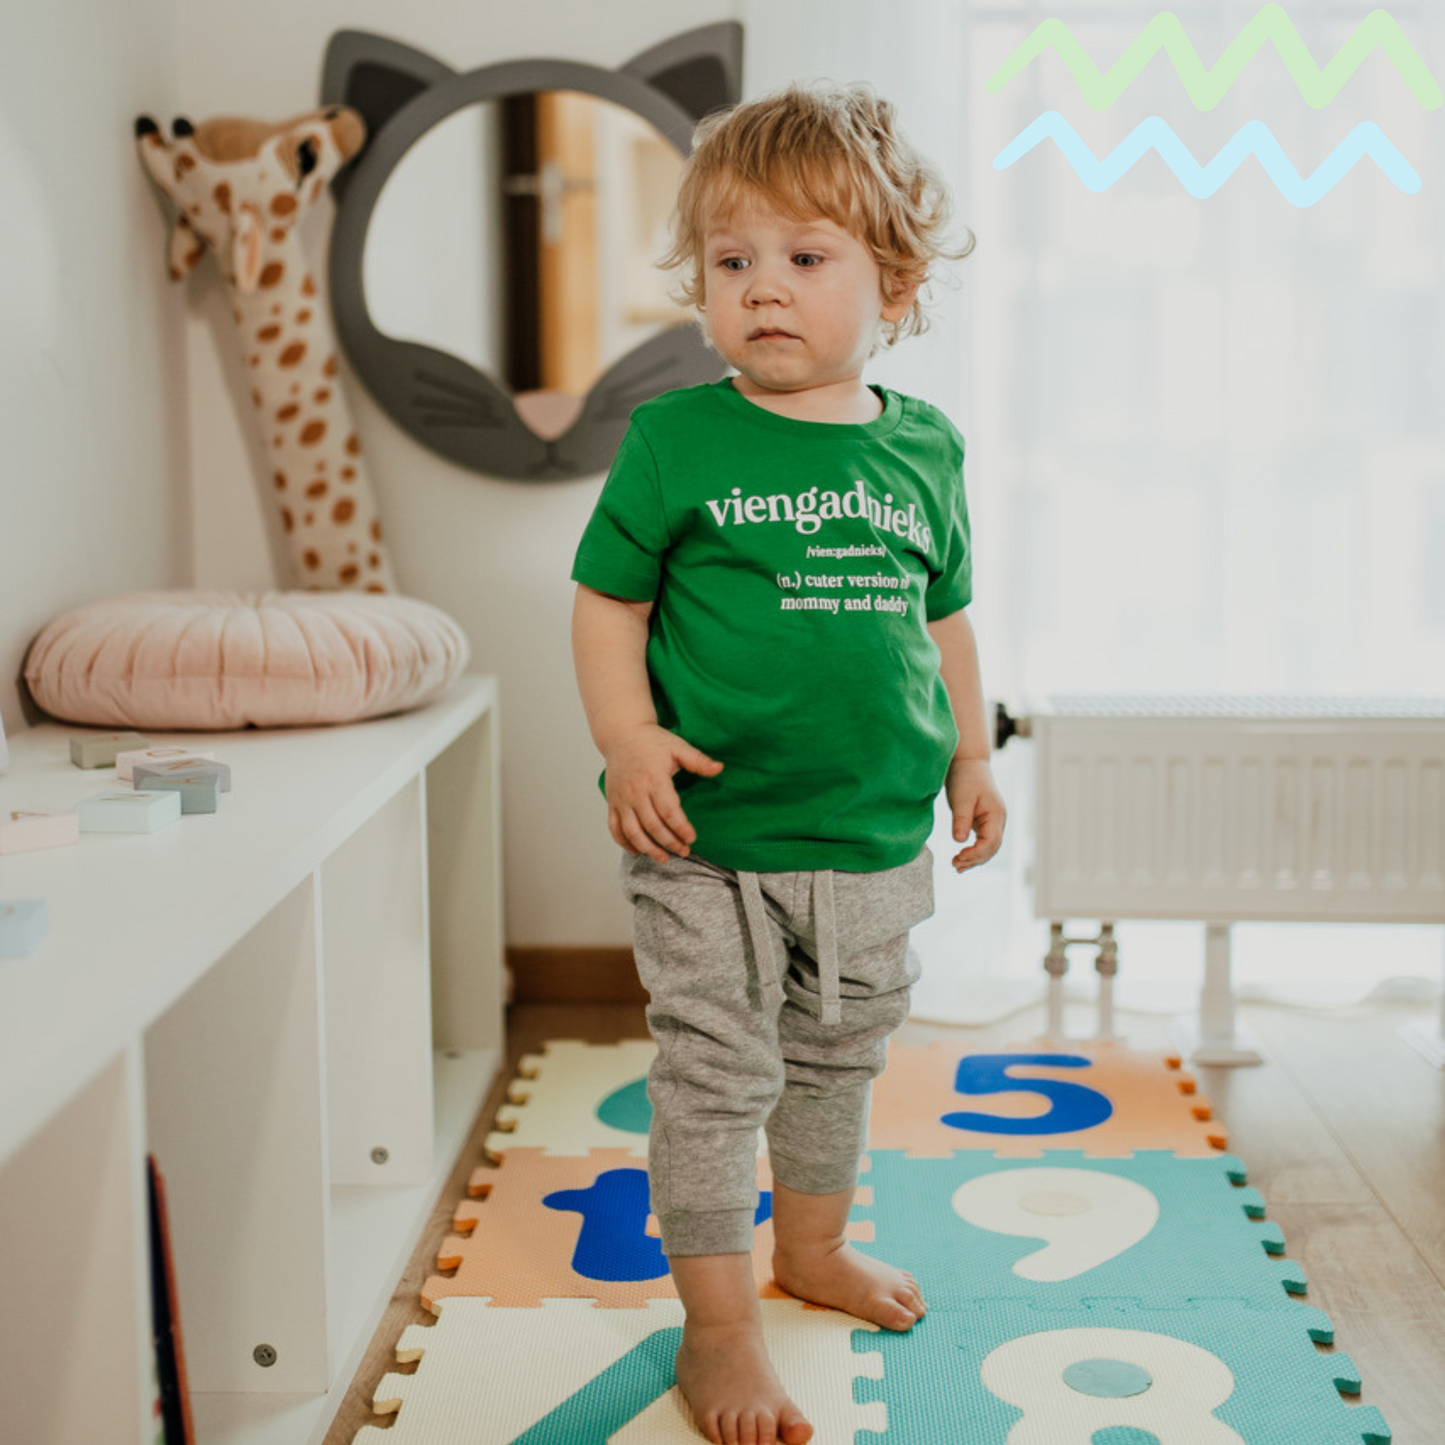 ONE-YEAR-OLD | T-SHIRT